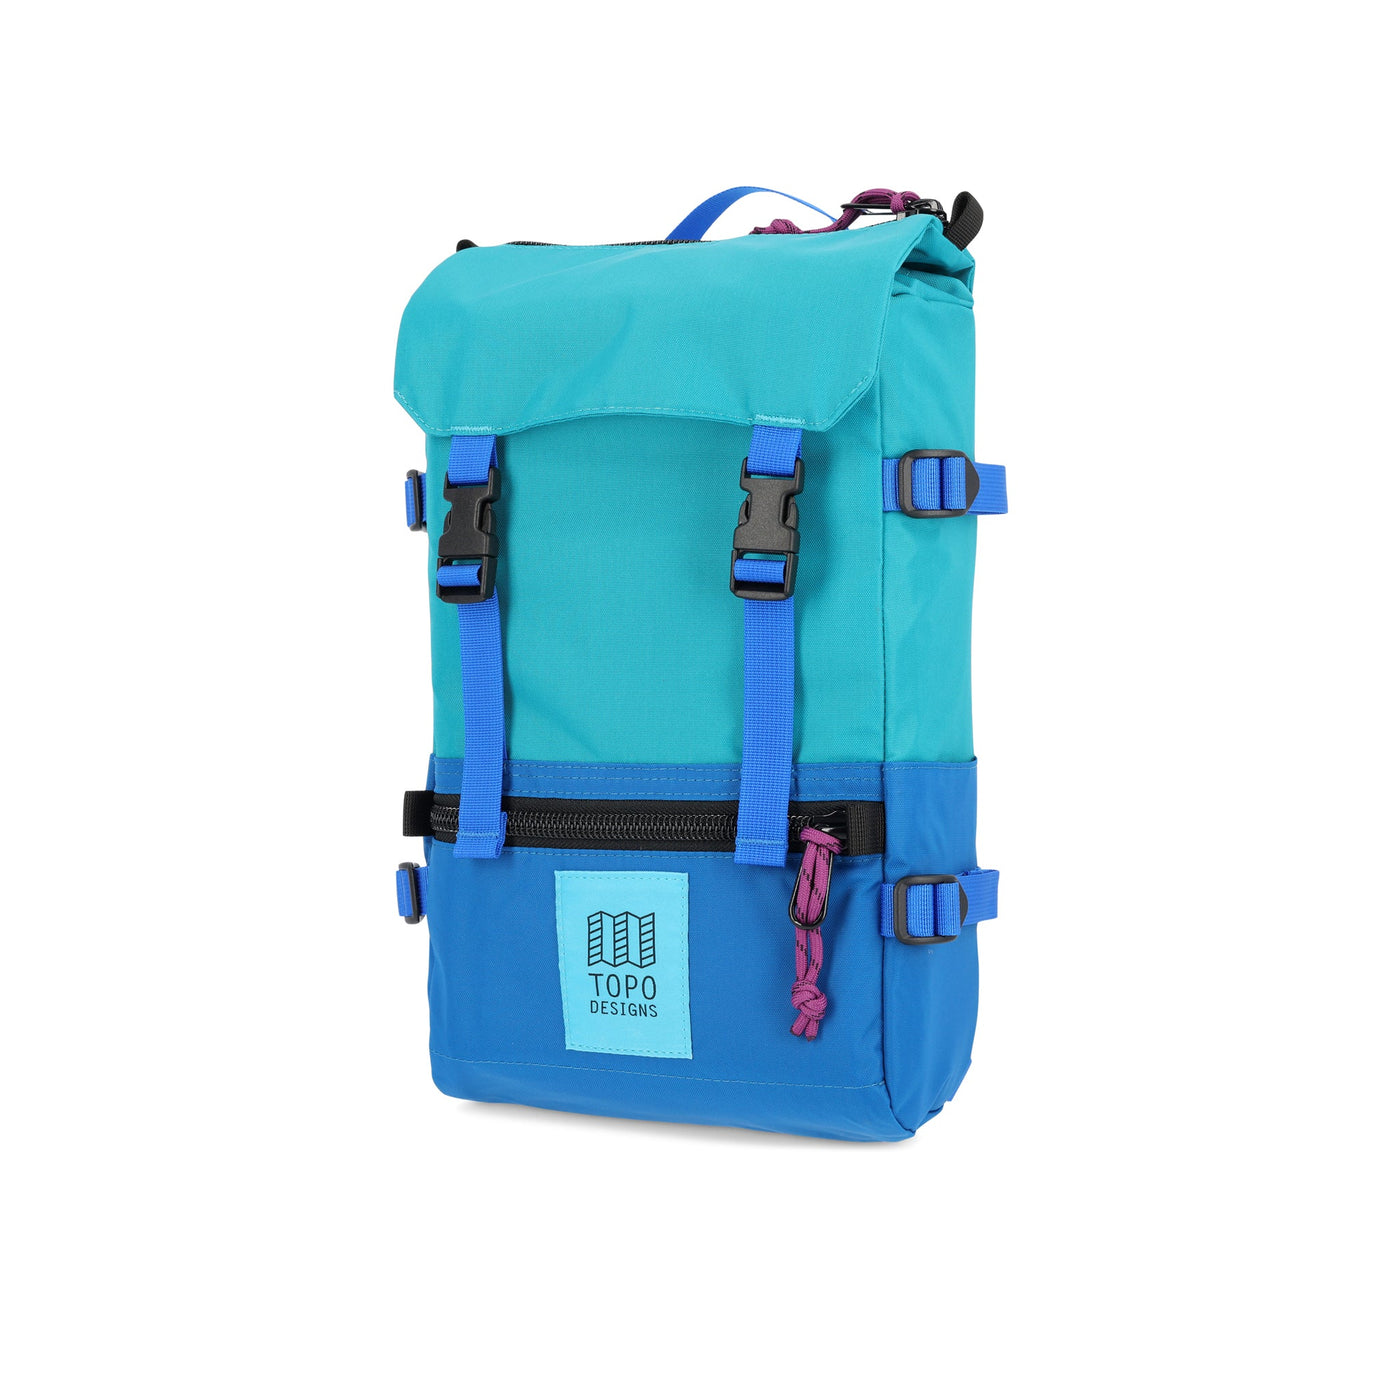 Topo Designs Rover Pack Mini backpack in recycled "Tile Blue / Blue"